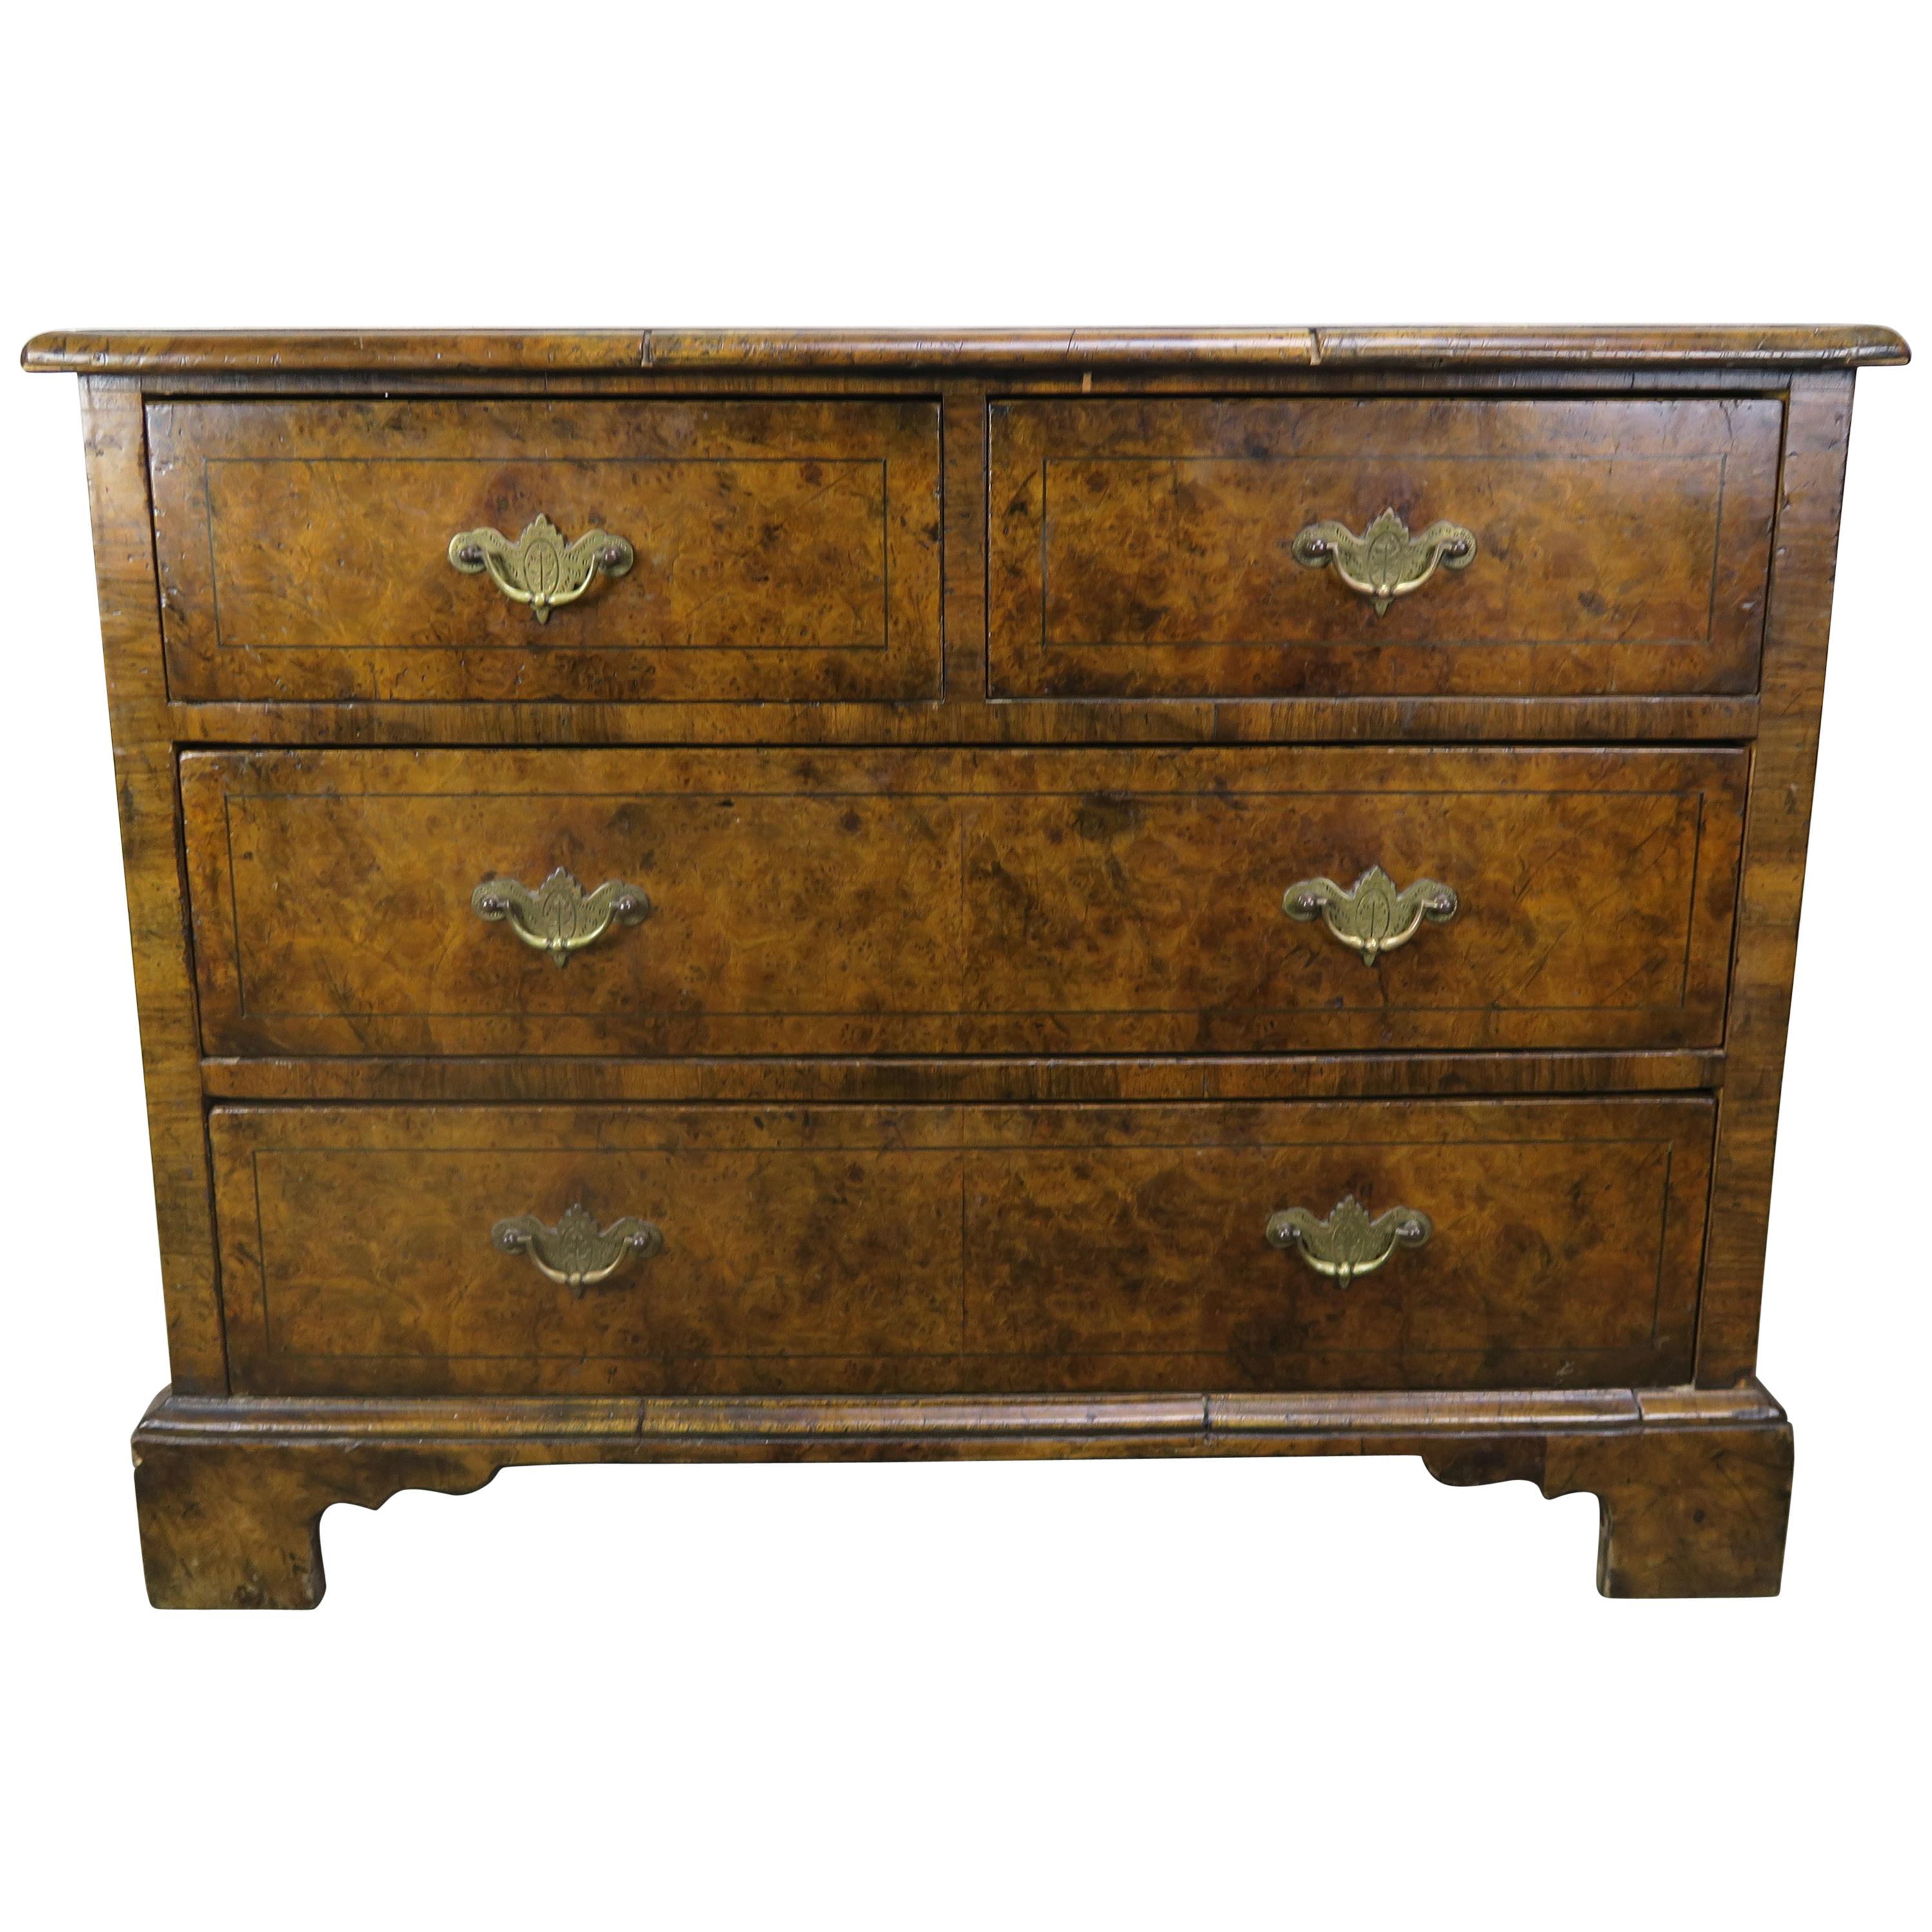 19th Century English Oyster Veneered Chest of Drawers